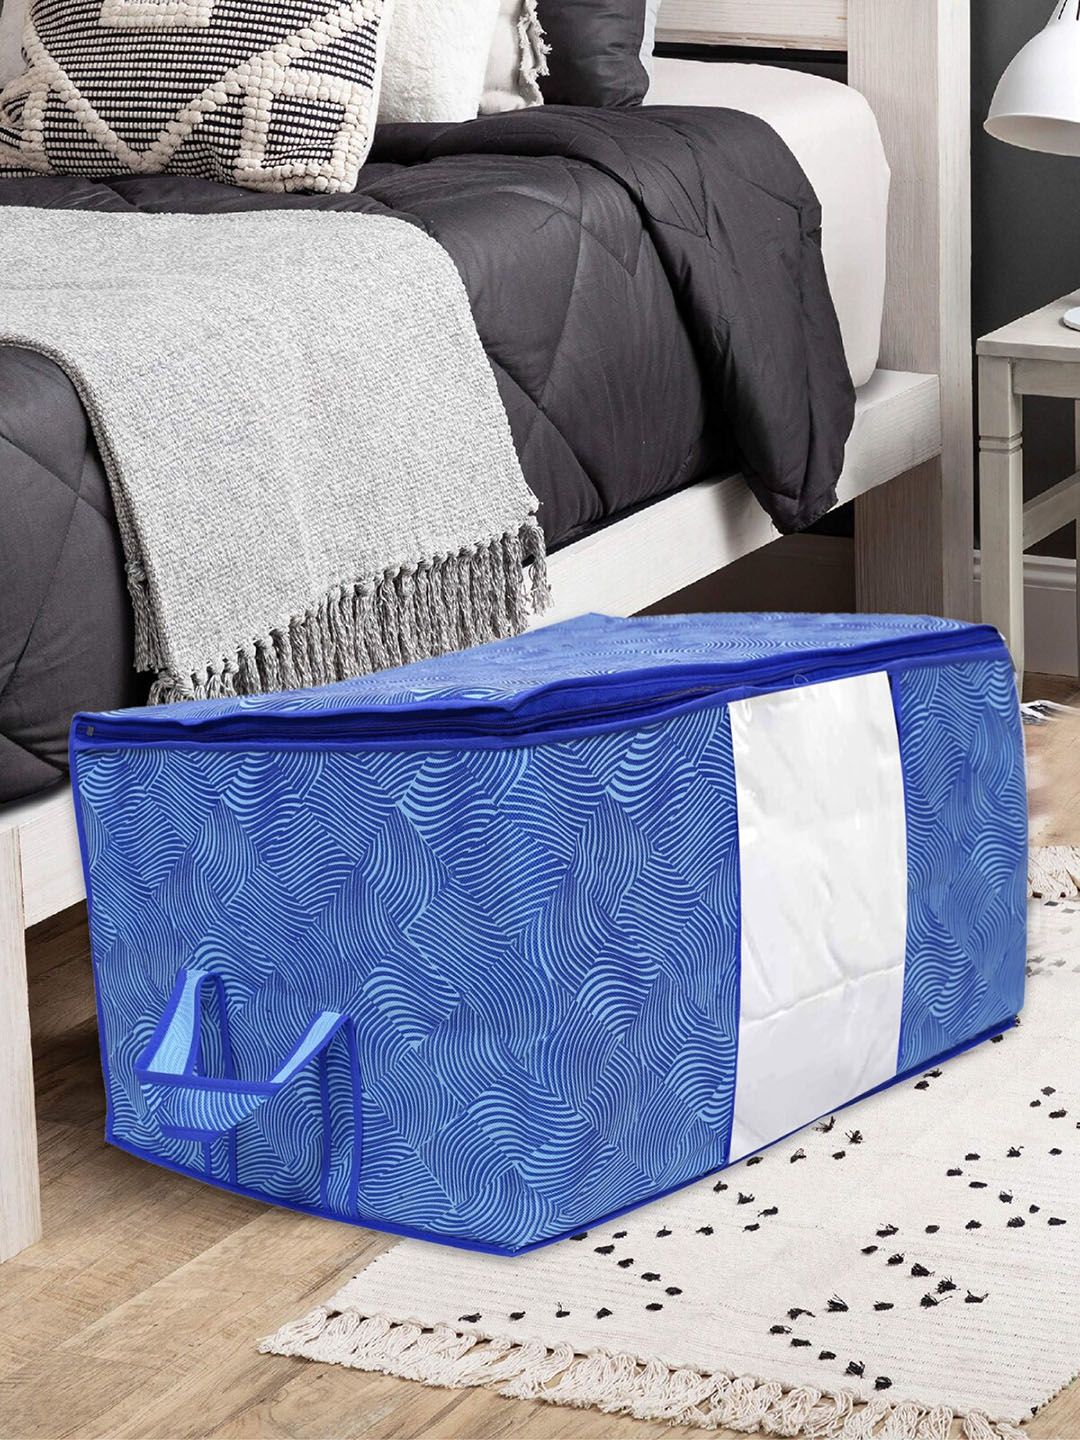 Home Fresh Set Of 4 Blue Printed Fabric Wardrobe Organisers Price in India